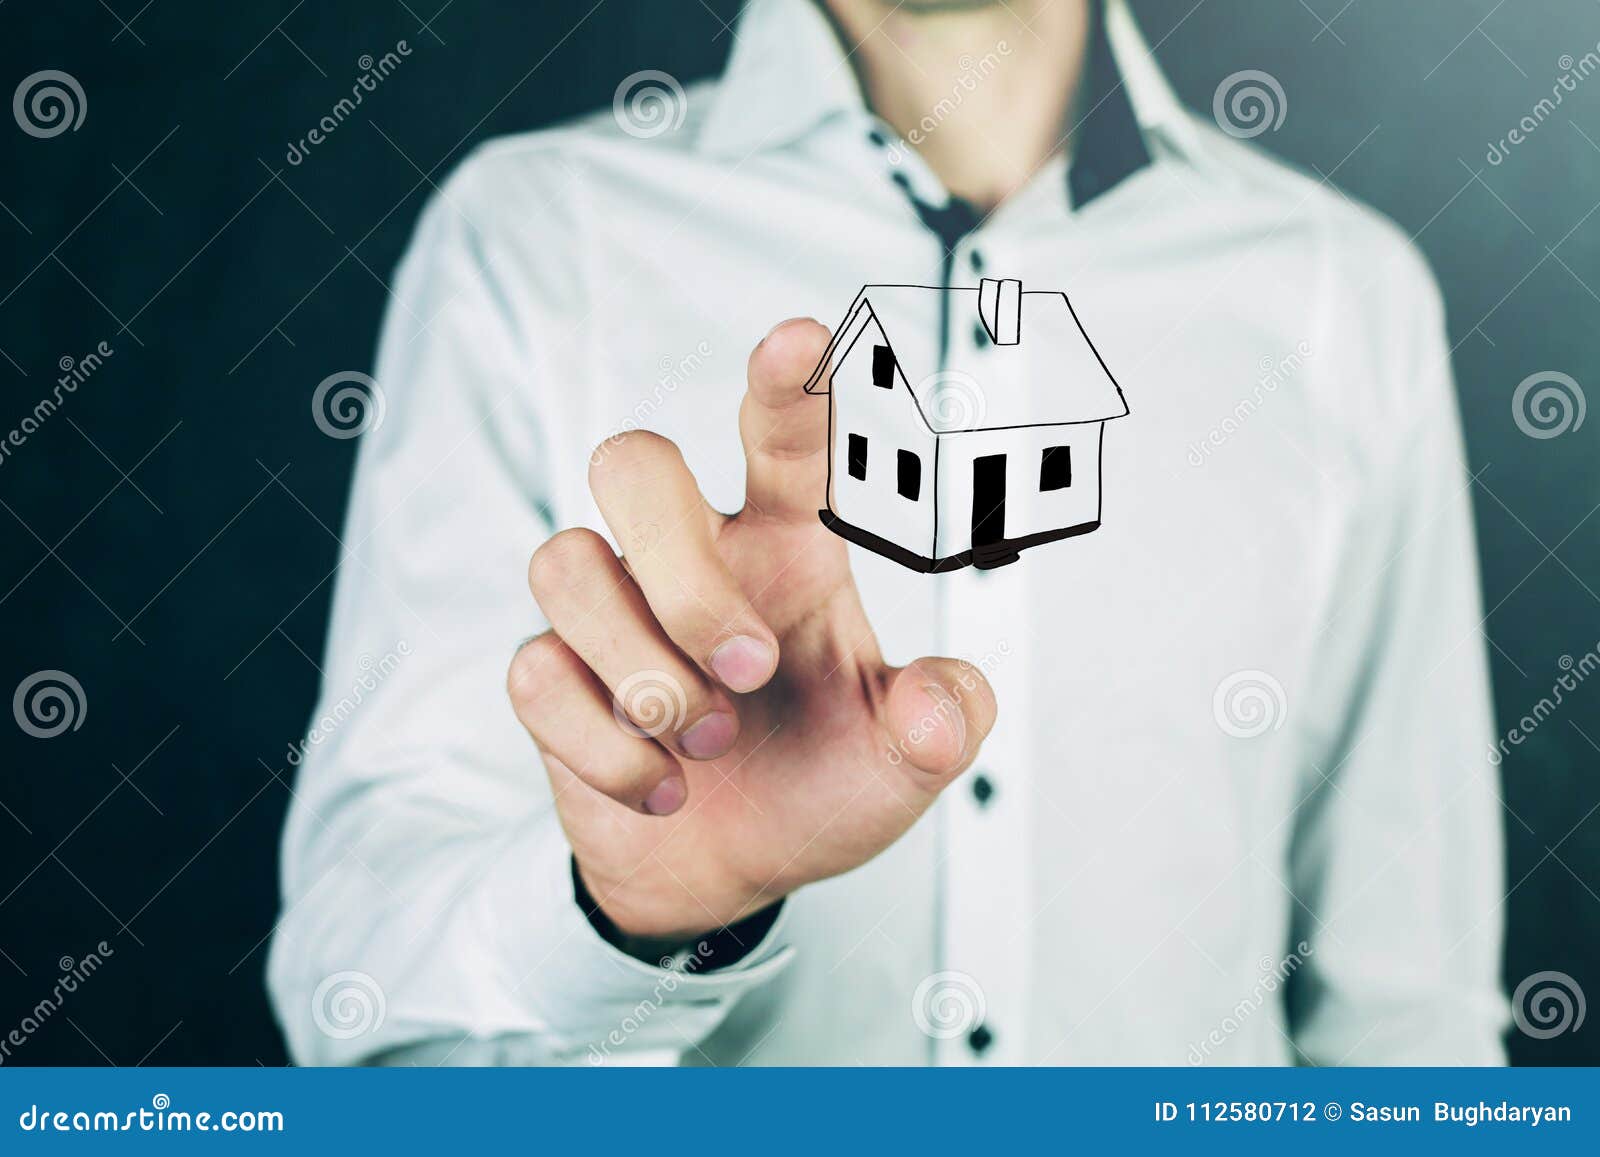 house in human hands